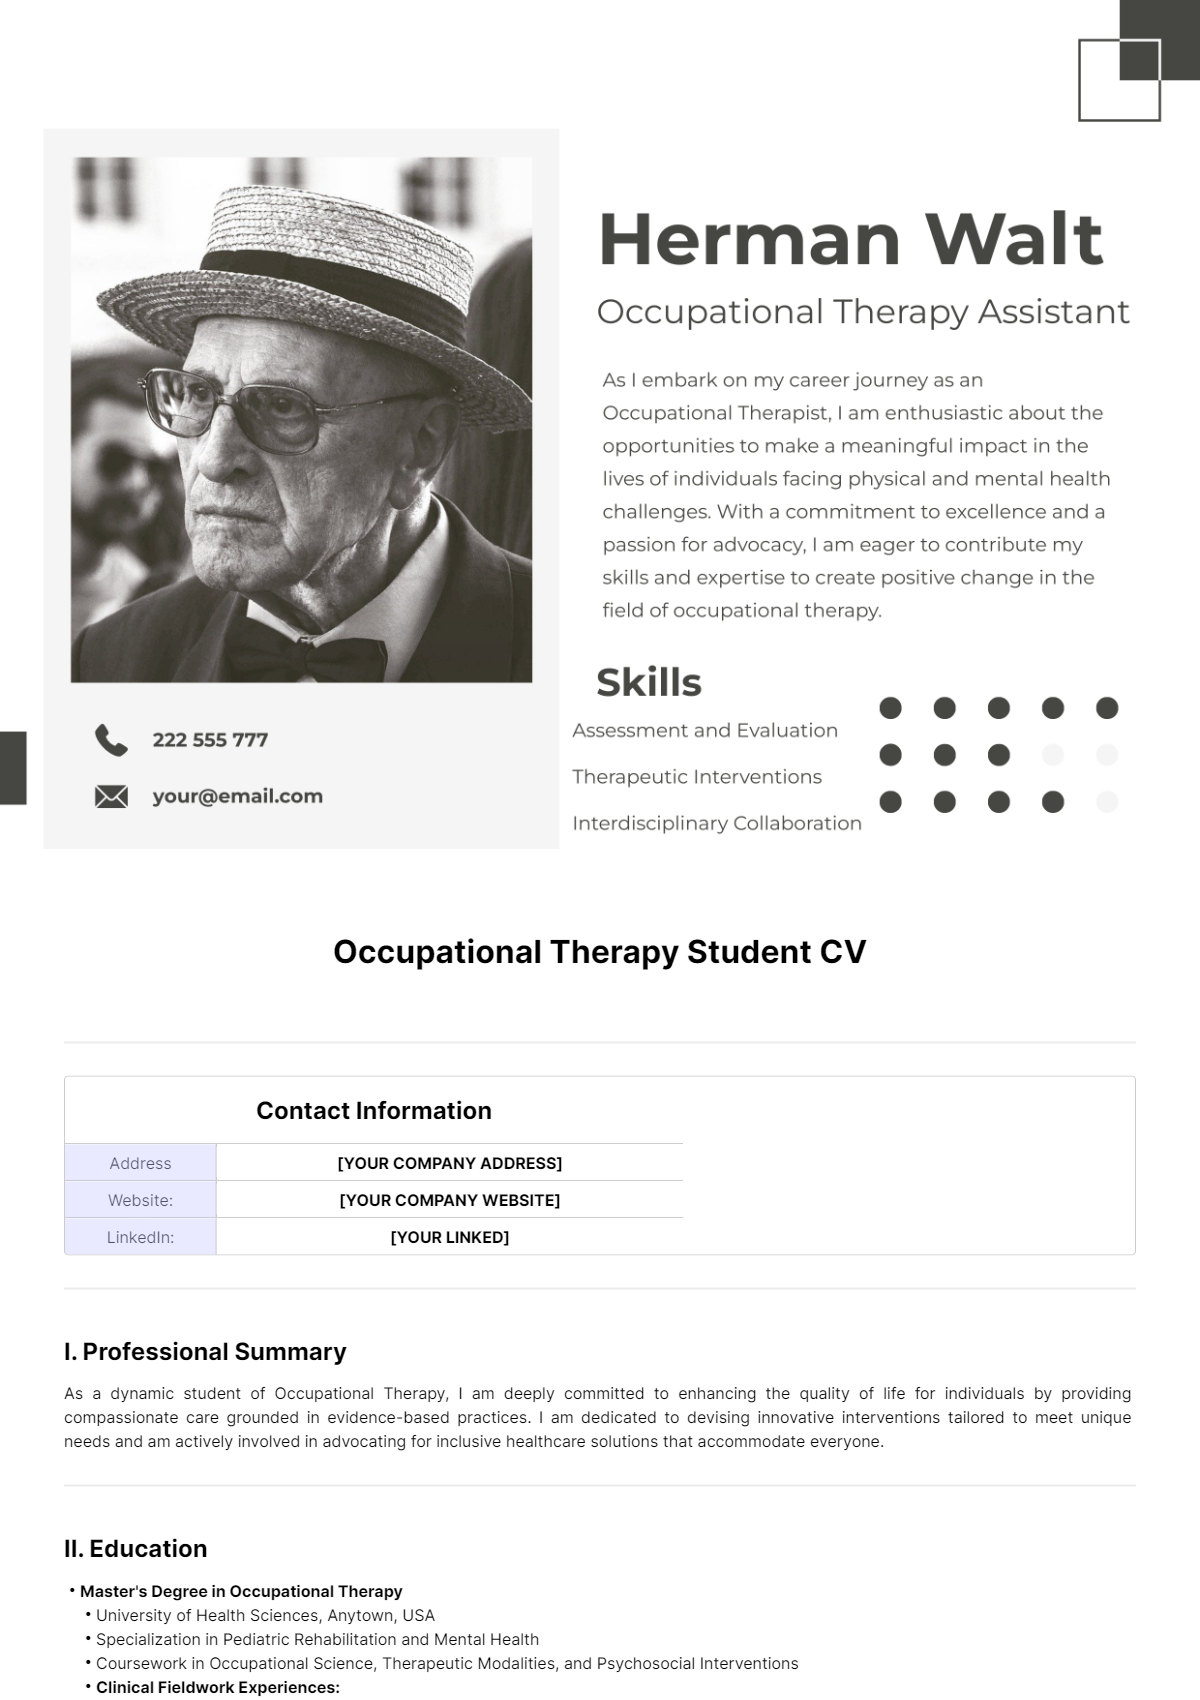 Occupational Therapy Student CV Template